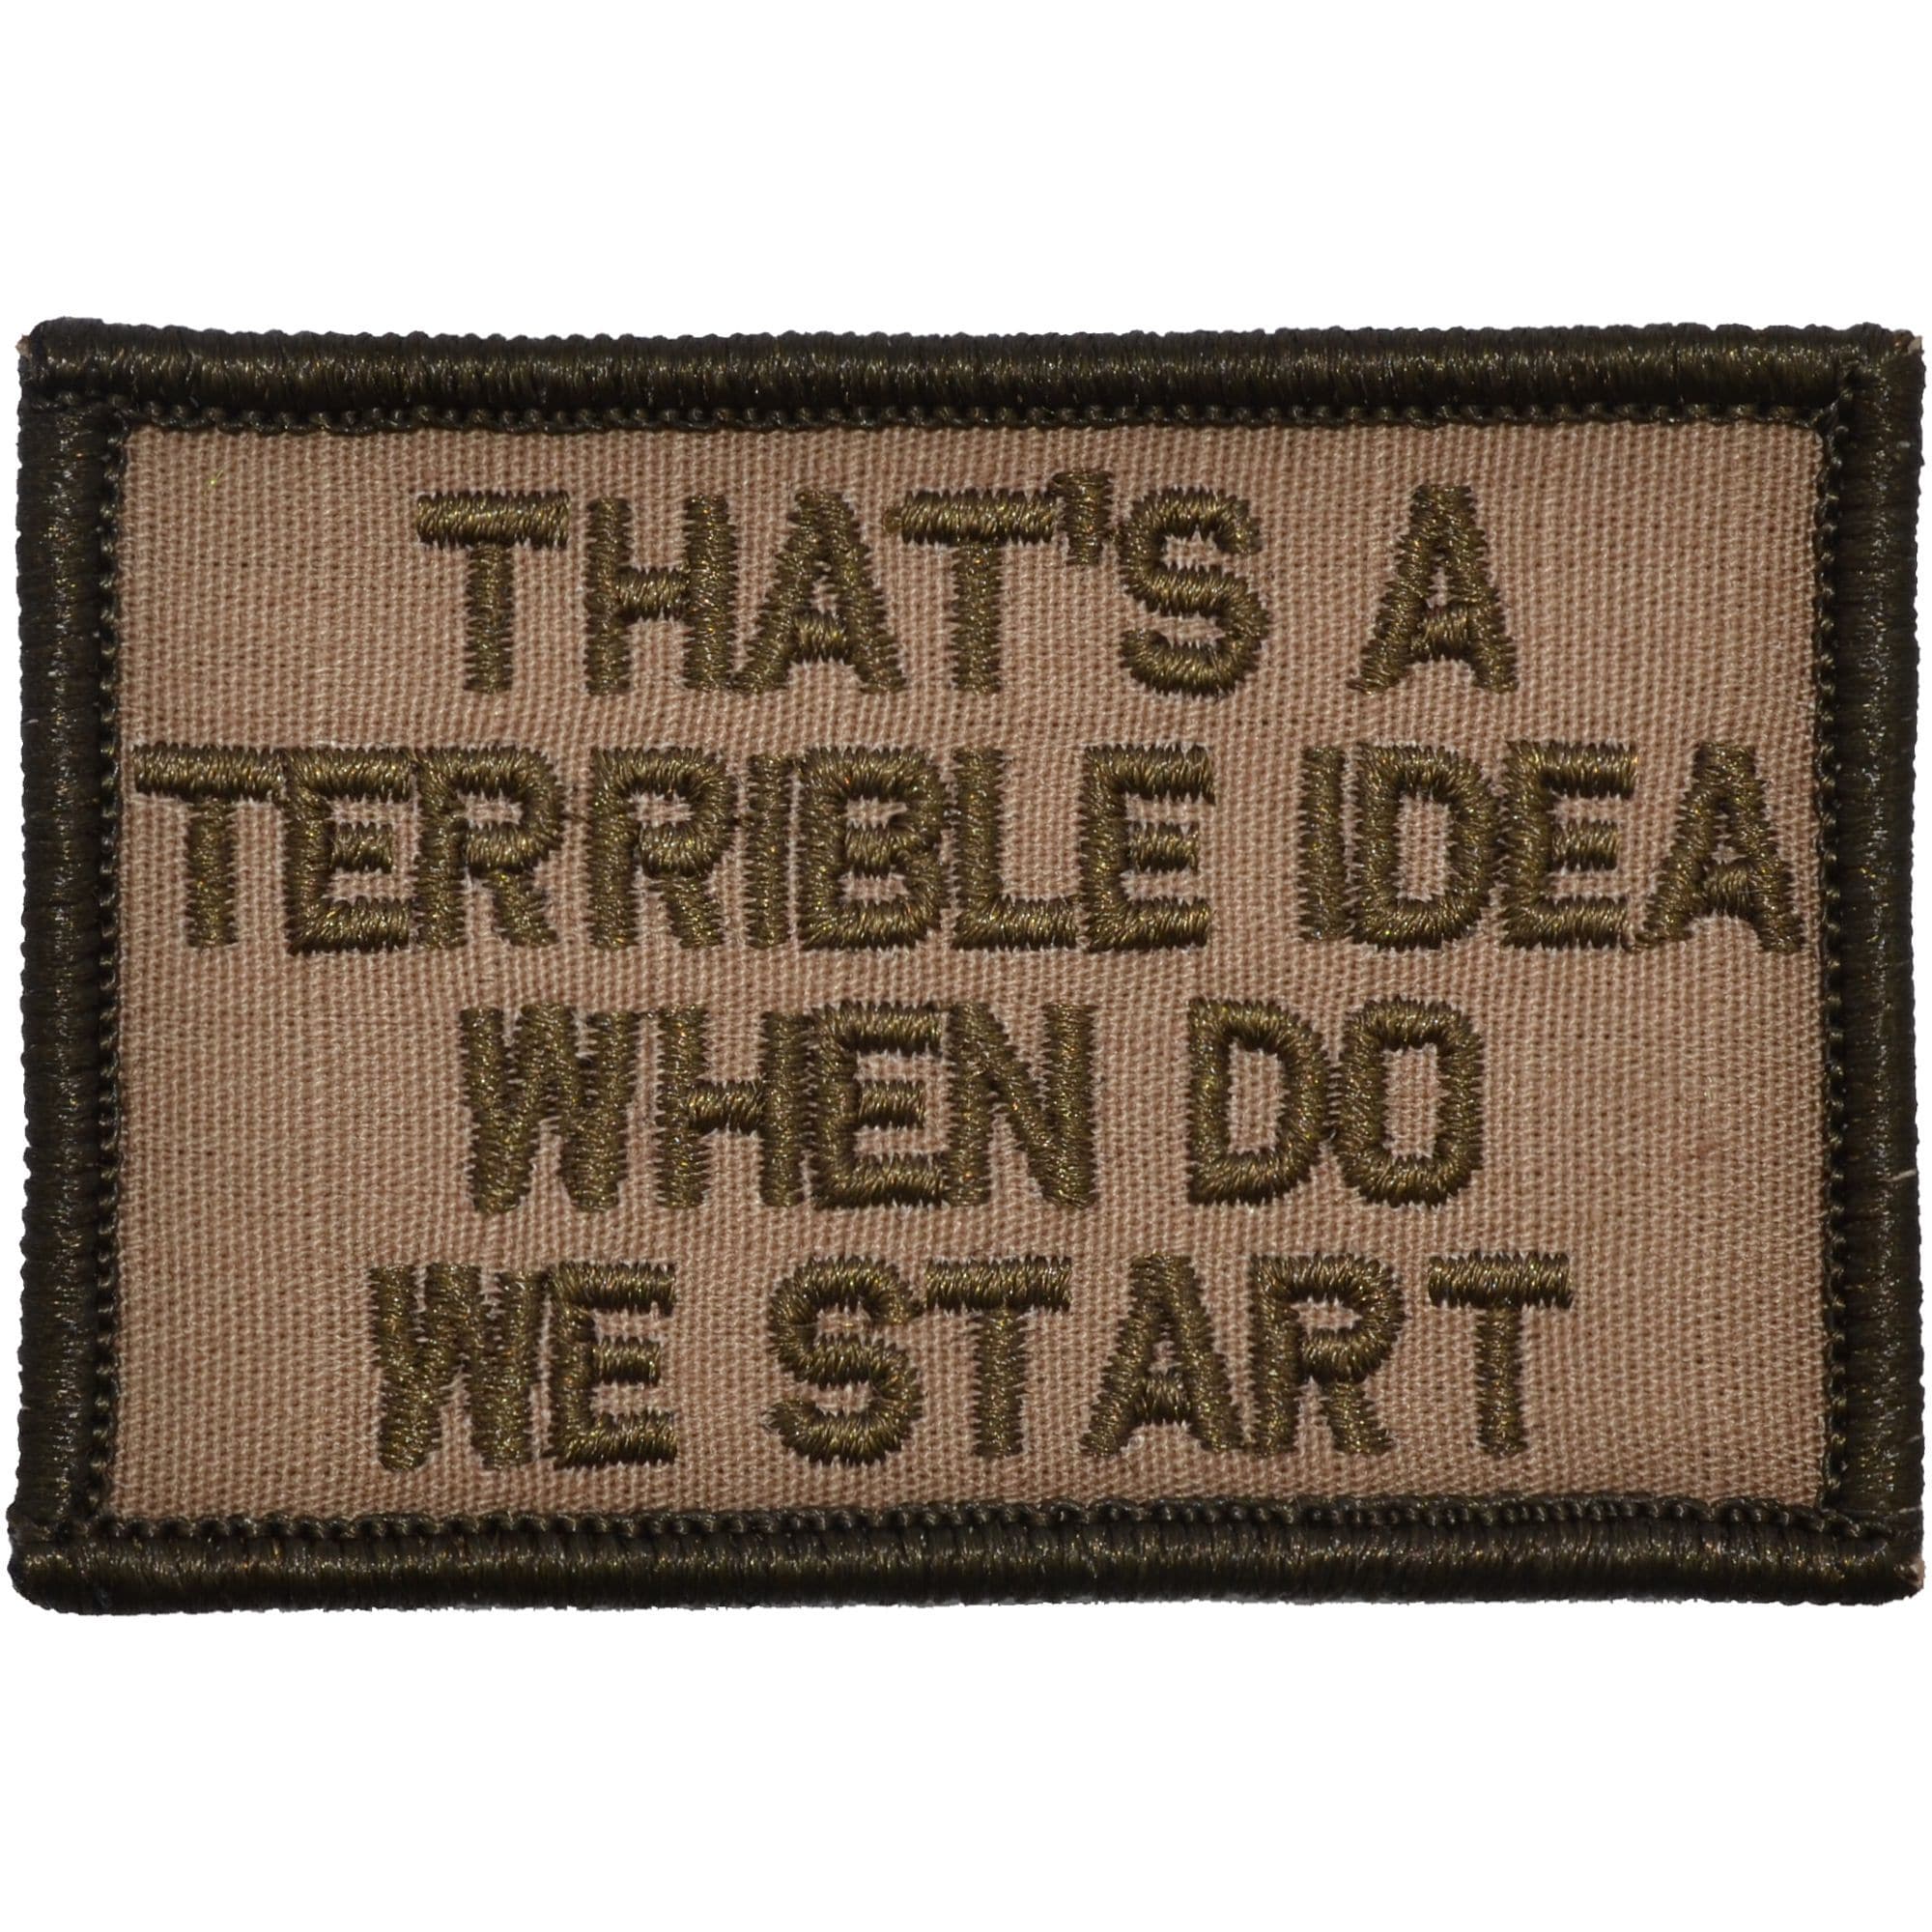 Tactical Gear Junkie Patches Coyote Brown That's a Terrible Idea When Do We Start - 2x3 Patch